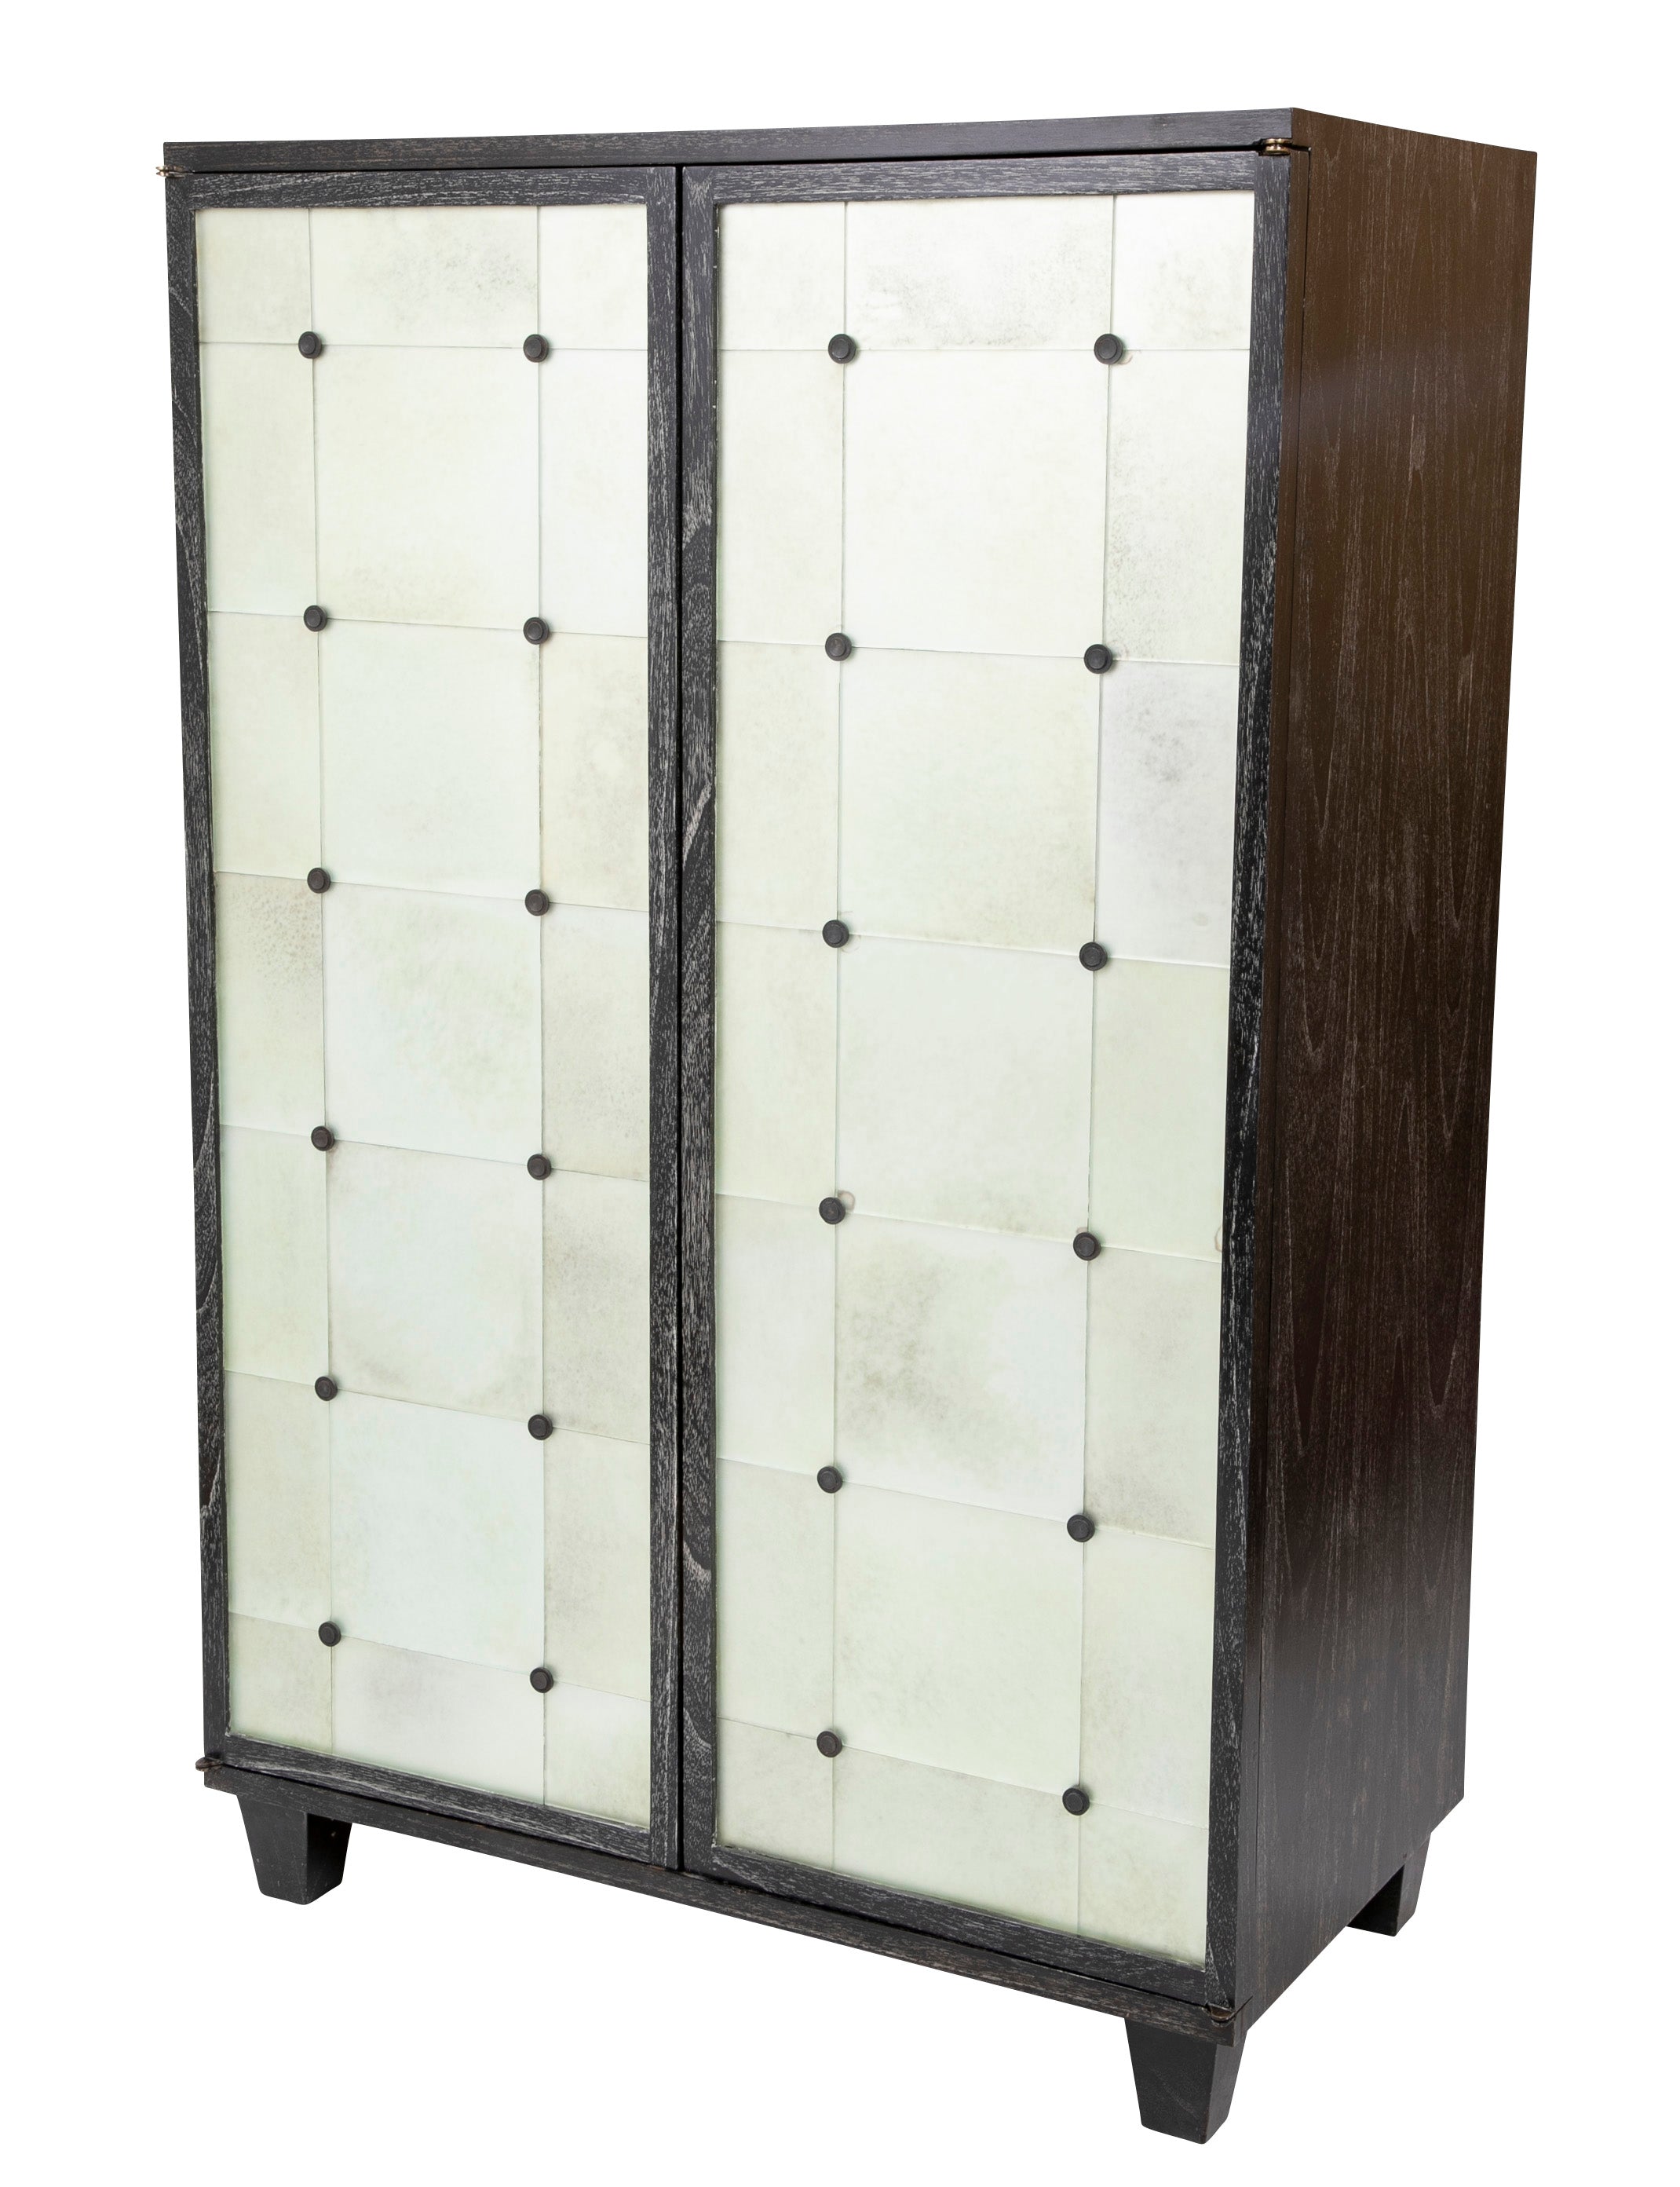 A Two Door Ebonized and Cerused Cabinet